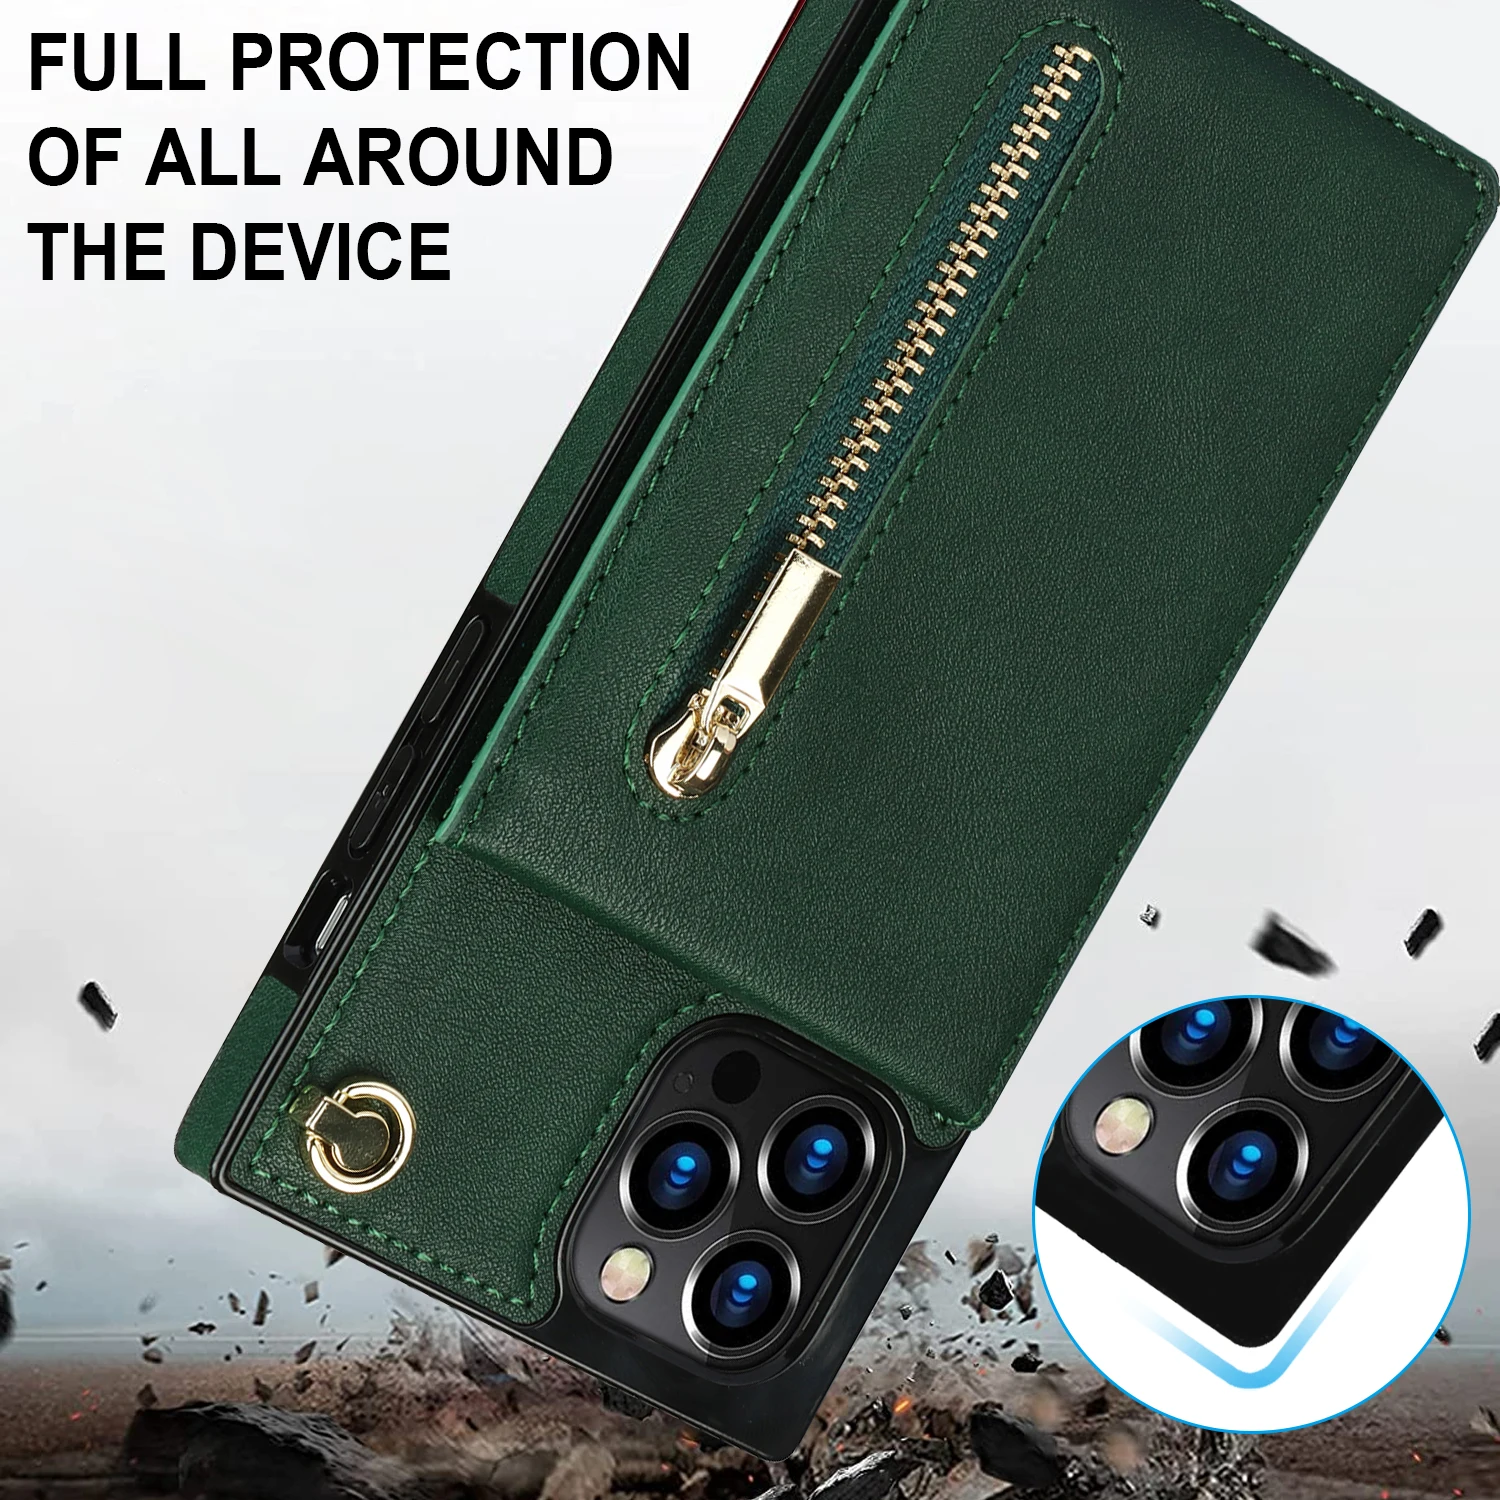 apple 13 pro max case Zipper Wallet for IPhone 13 12 Mini 11 X XR XS Pro Max 7 8 Plus Case with Card Holder Lanyard Strap Crossbody Leather Cover case iphone 13 pro max